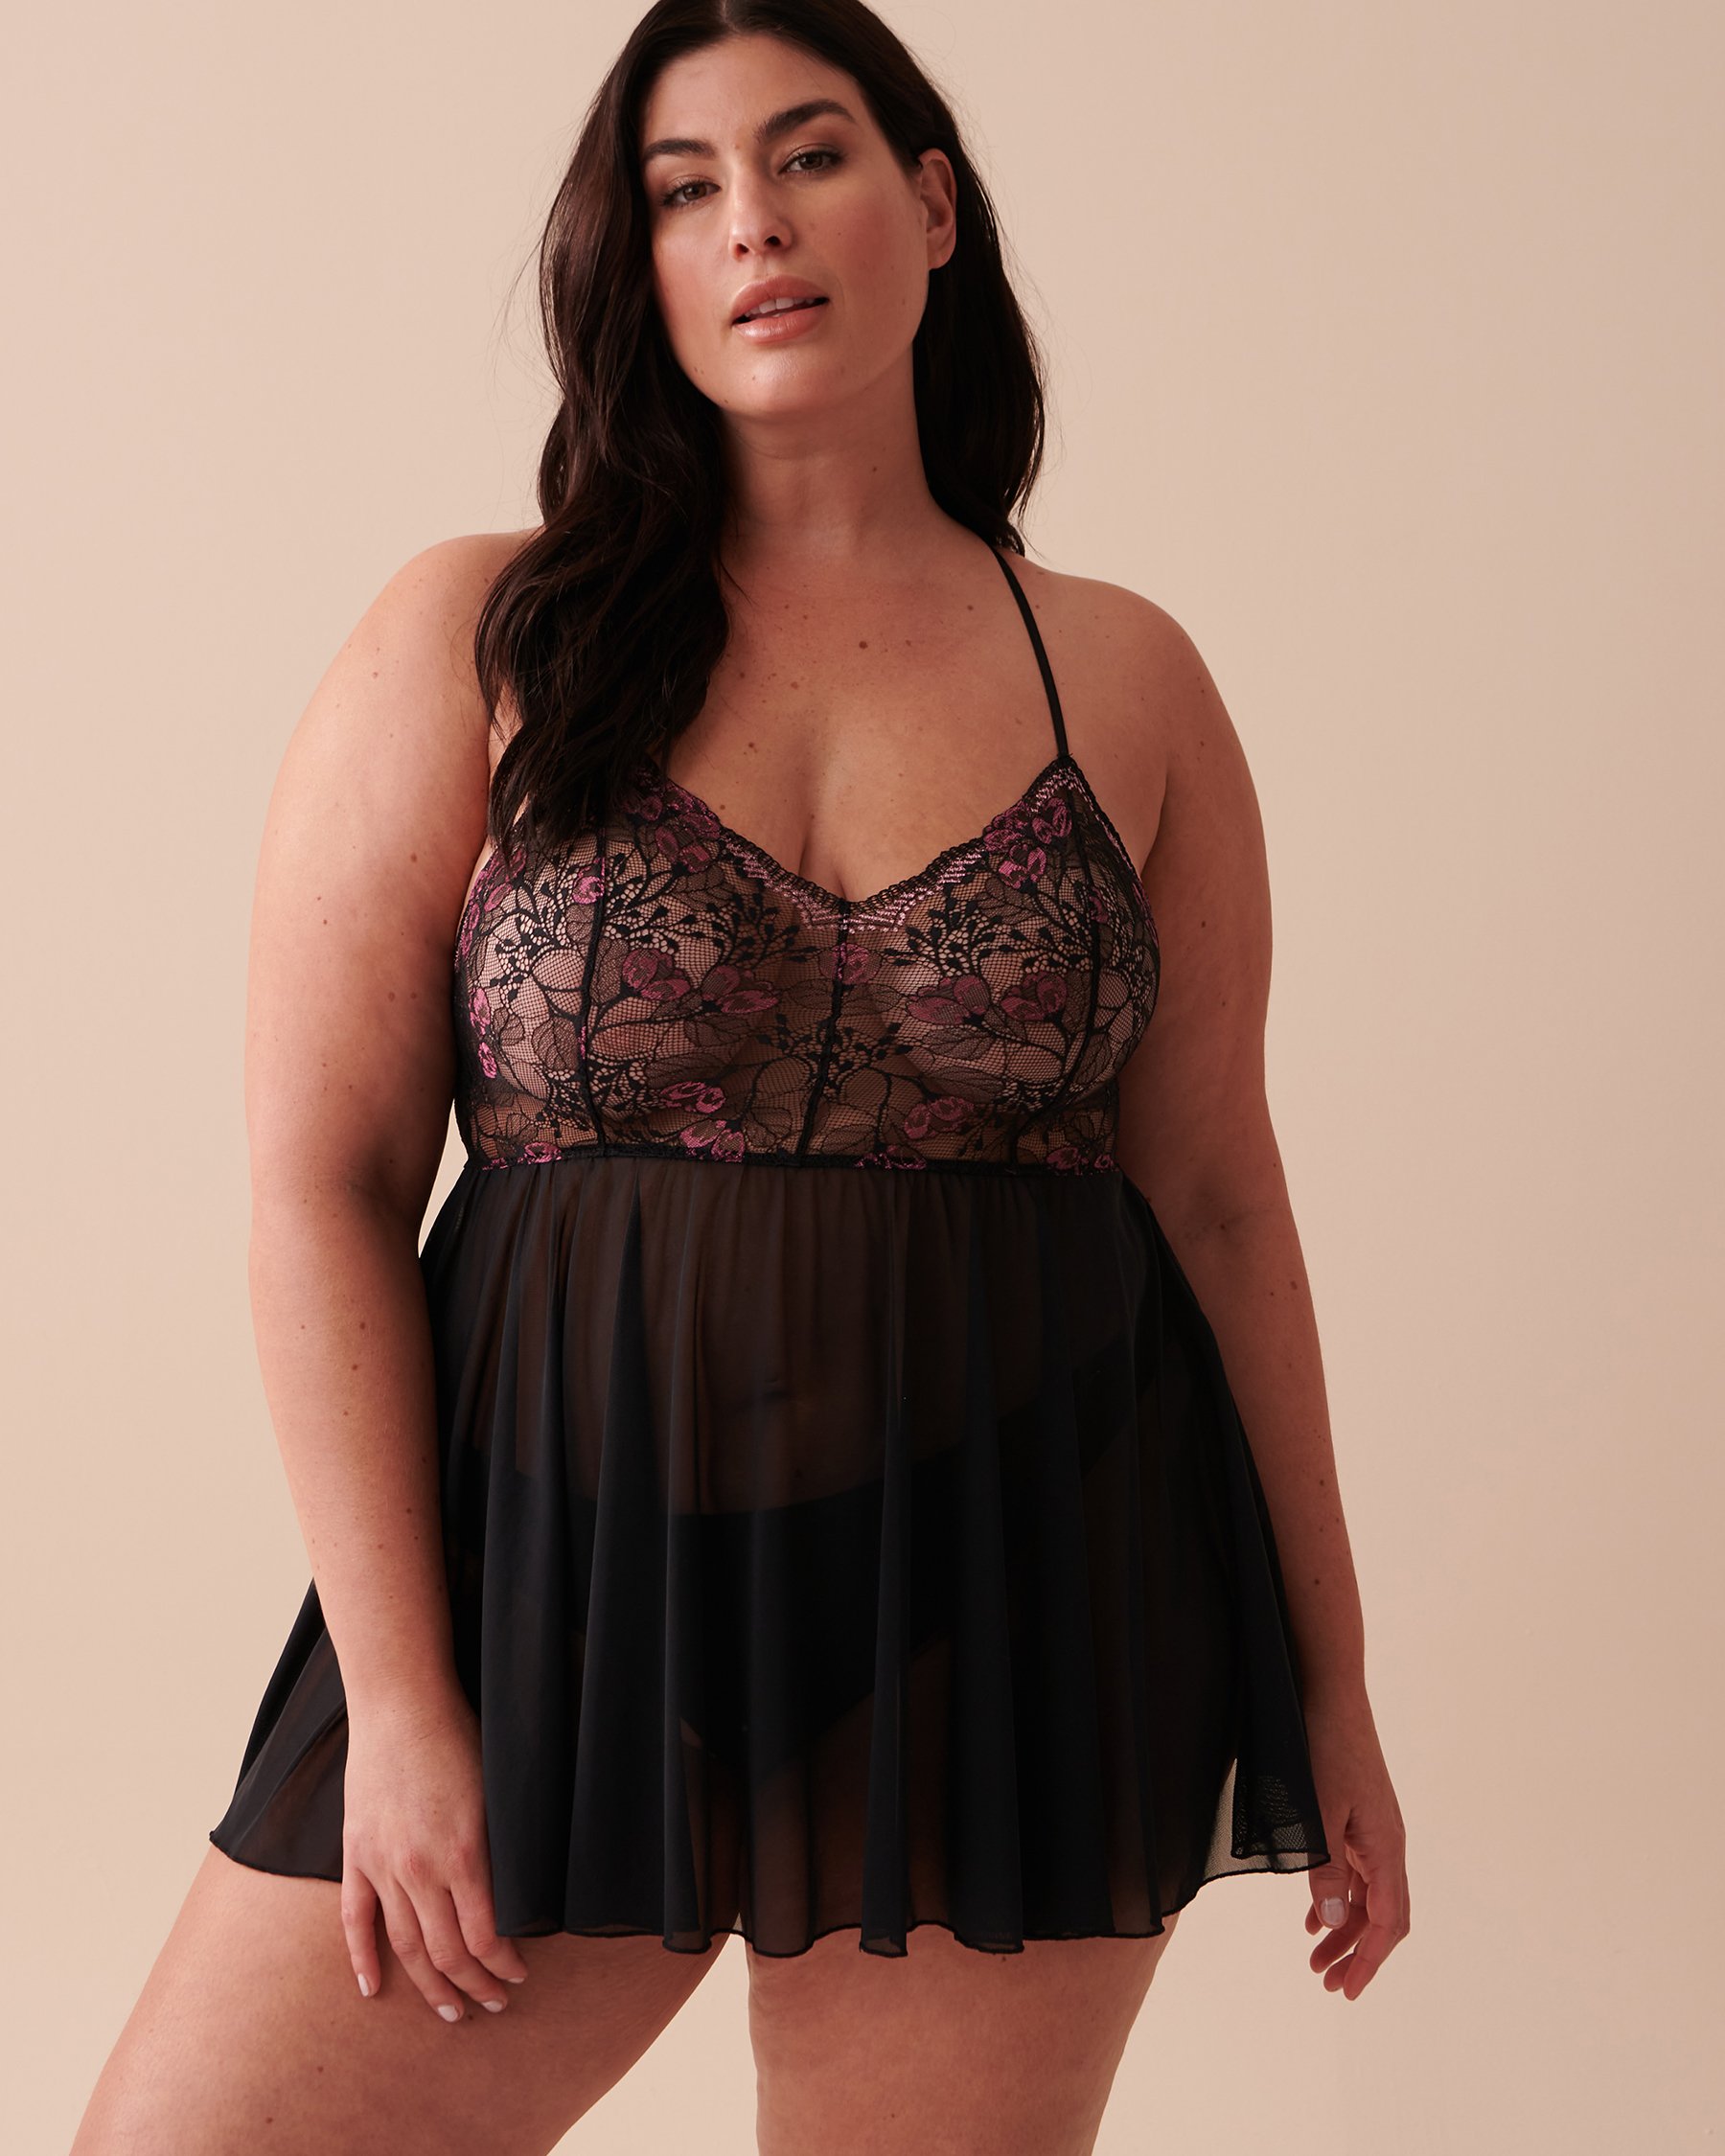 LA VIE EN ROSE Embroidered Lace and Mesh Babydoll Black 60500132 - View6